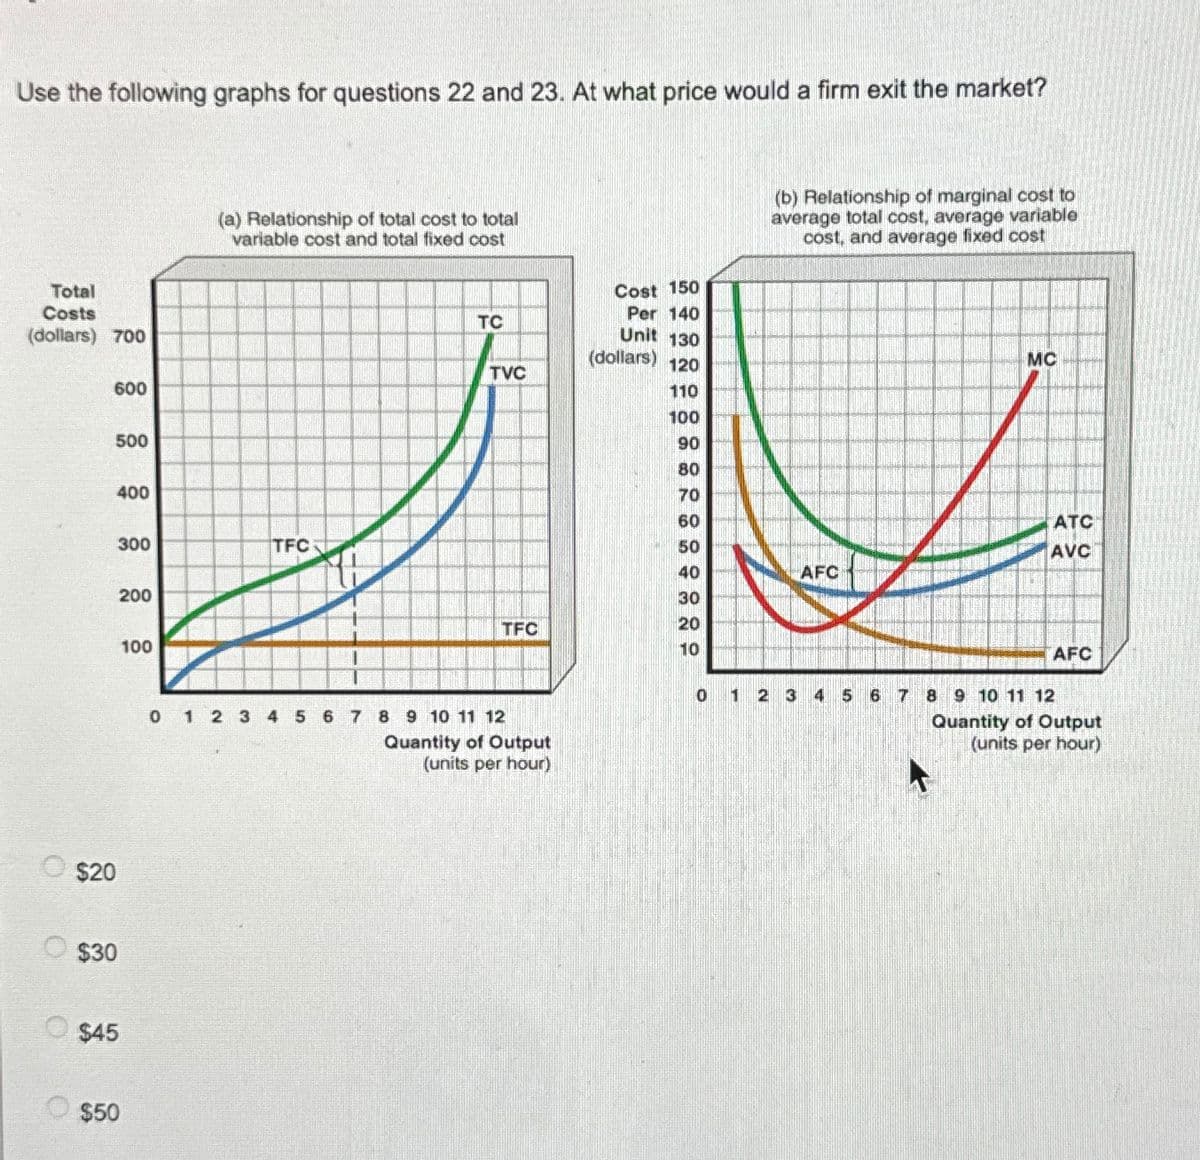 Use the following graphs for questions 22 and 23. At what price would a firm exit the market?
(a) Relationship of total cost to total
variable cost and total fixed cost
(b) Relationship of marginal cost to
average total cost, average variable
cost, and average fixed cost
Total
Costs
(dollars) 700
Cost 150
Per 140
TC
Unit 130
TVC
(dollars) 120
MC
600
110
100
500
90
80
400
70
60
ATC
300
TFC
50
AVC
40
AFC
200
30
20
TFC
100
10
AFC
0 1 2 3
4 5
6 7 8 9 10 11 12
0 1 2 3 4 5 6 7 8 9 10 11 12
Quantity of Output
Quantity of Output
(units per hour)
(units per hour)
O
$20
O
$30
$45
$50